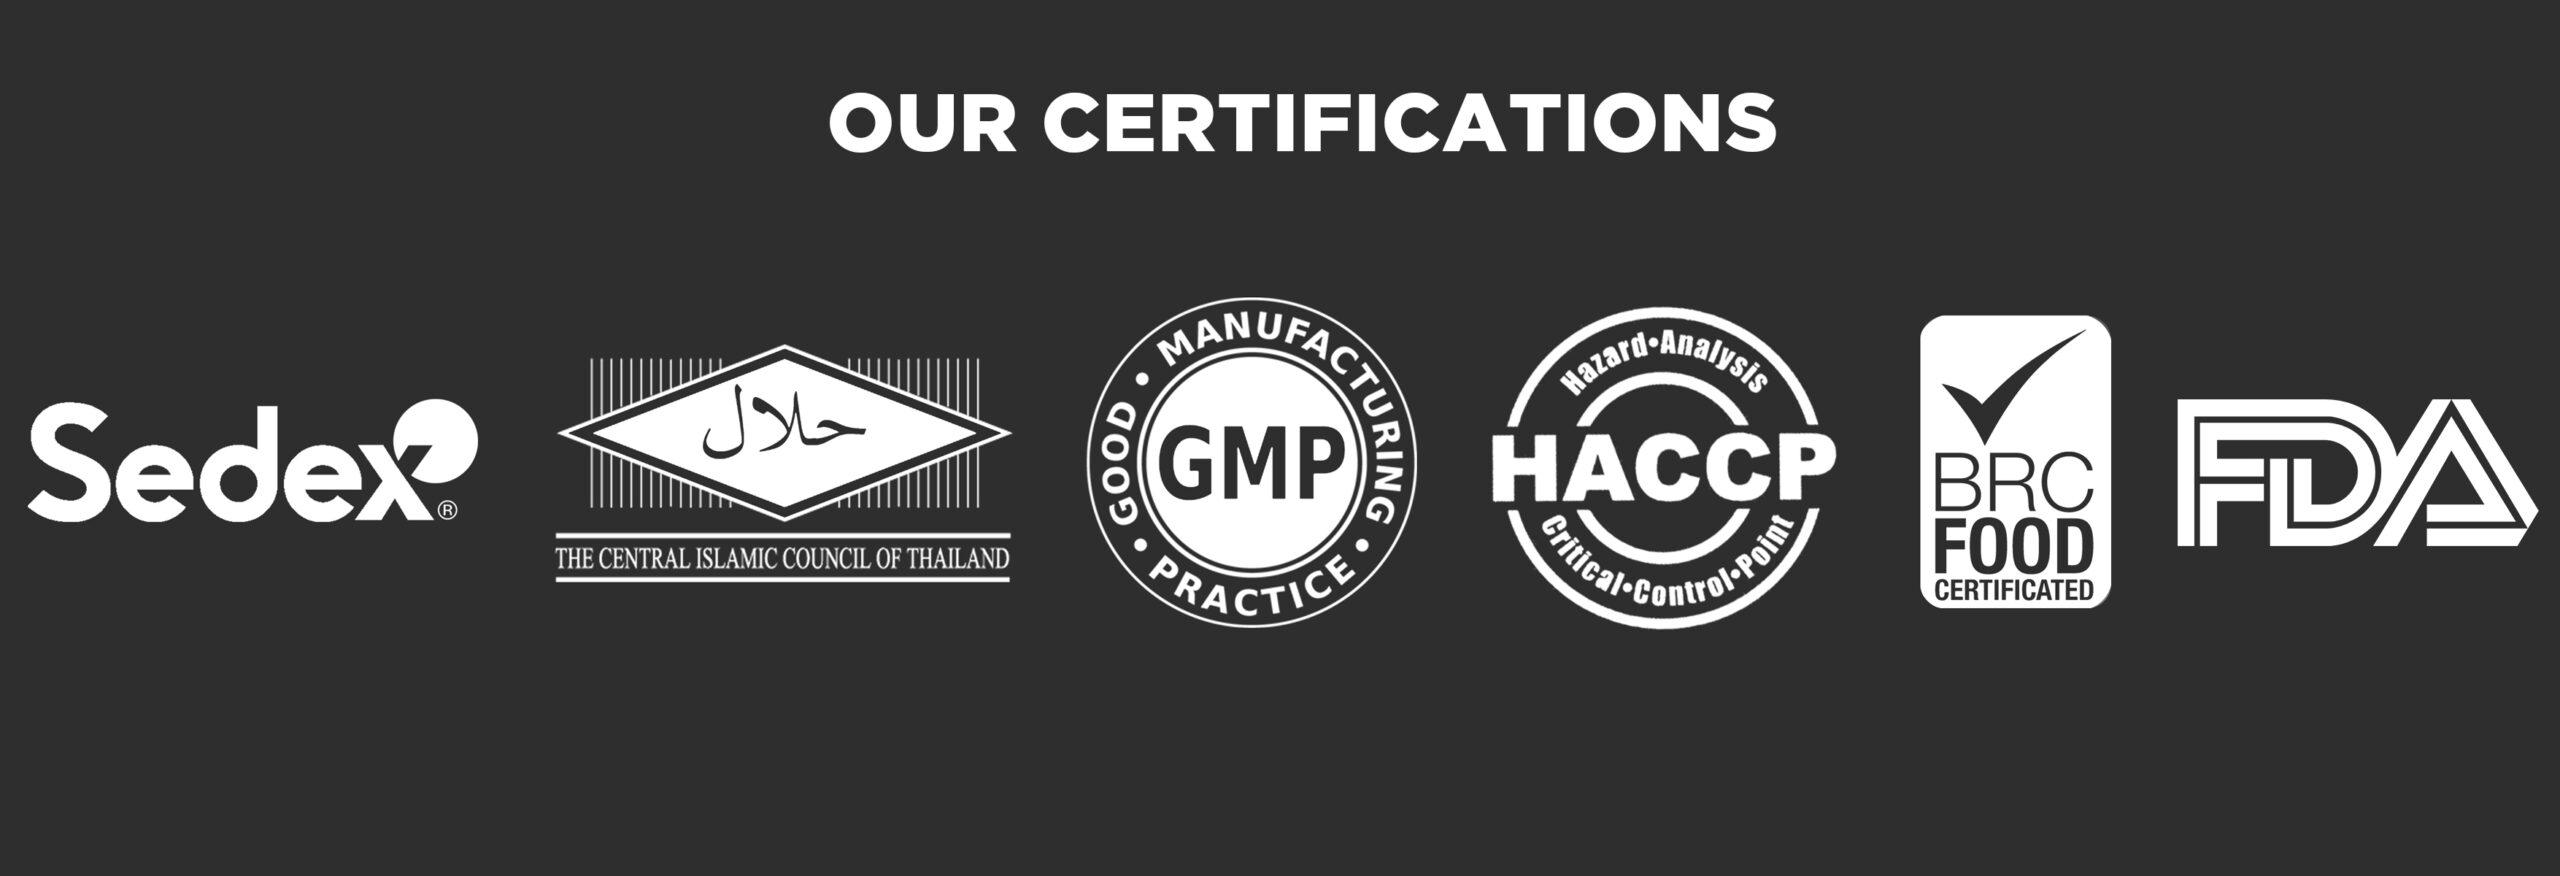 Certifications2a